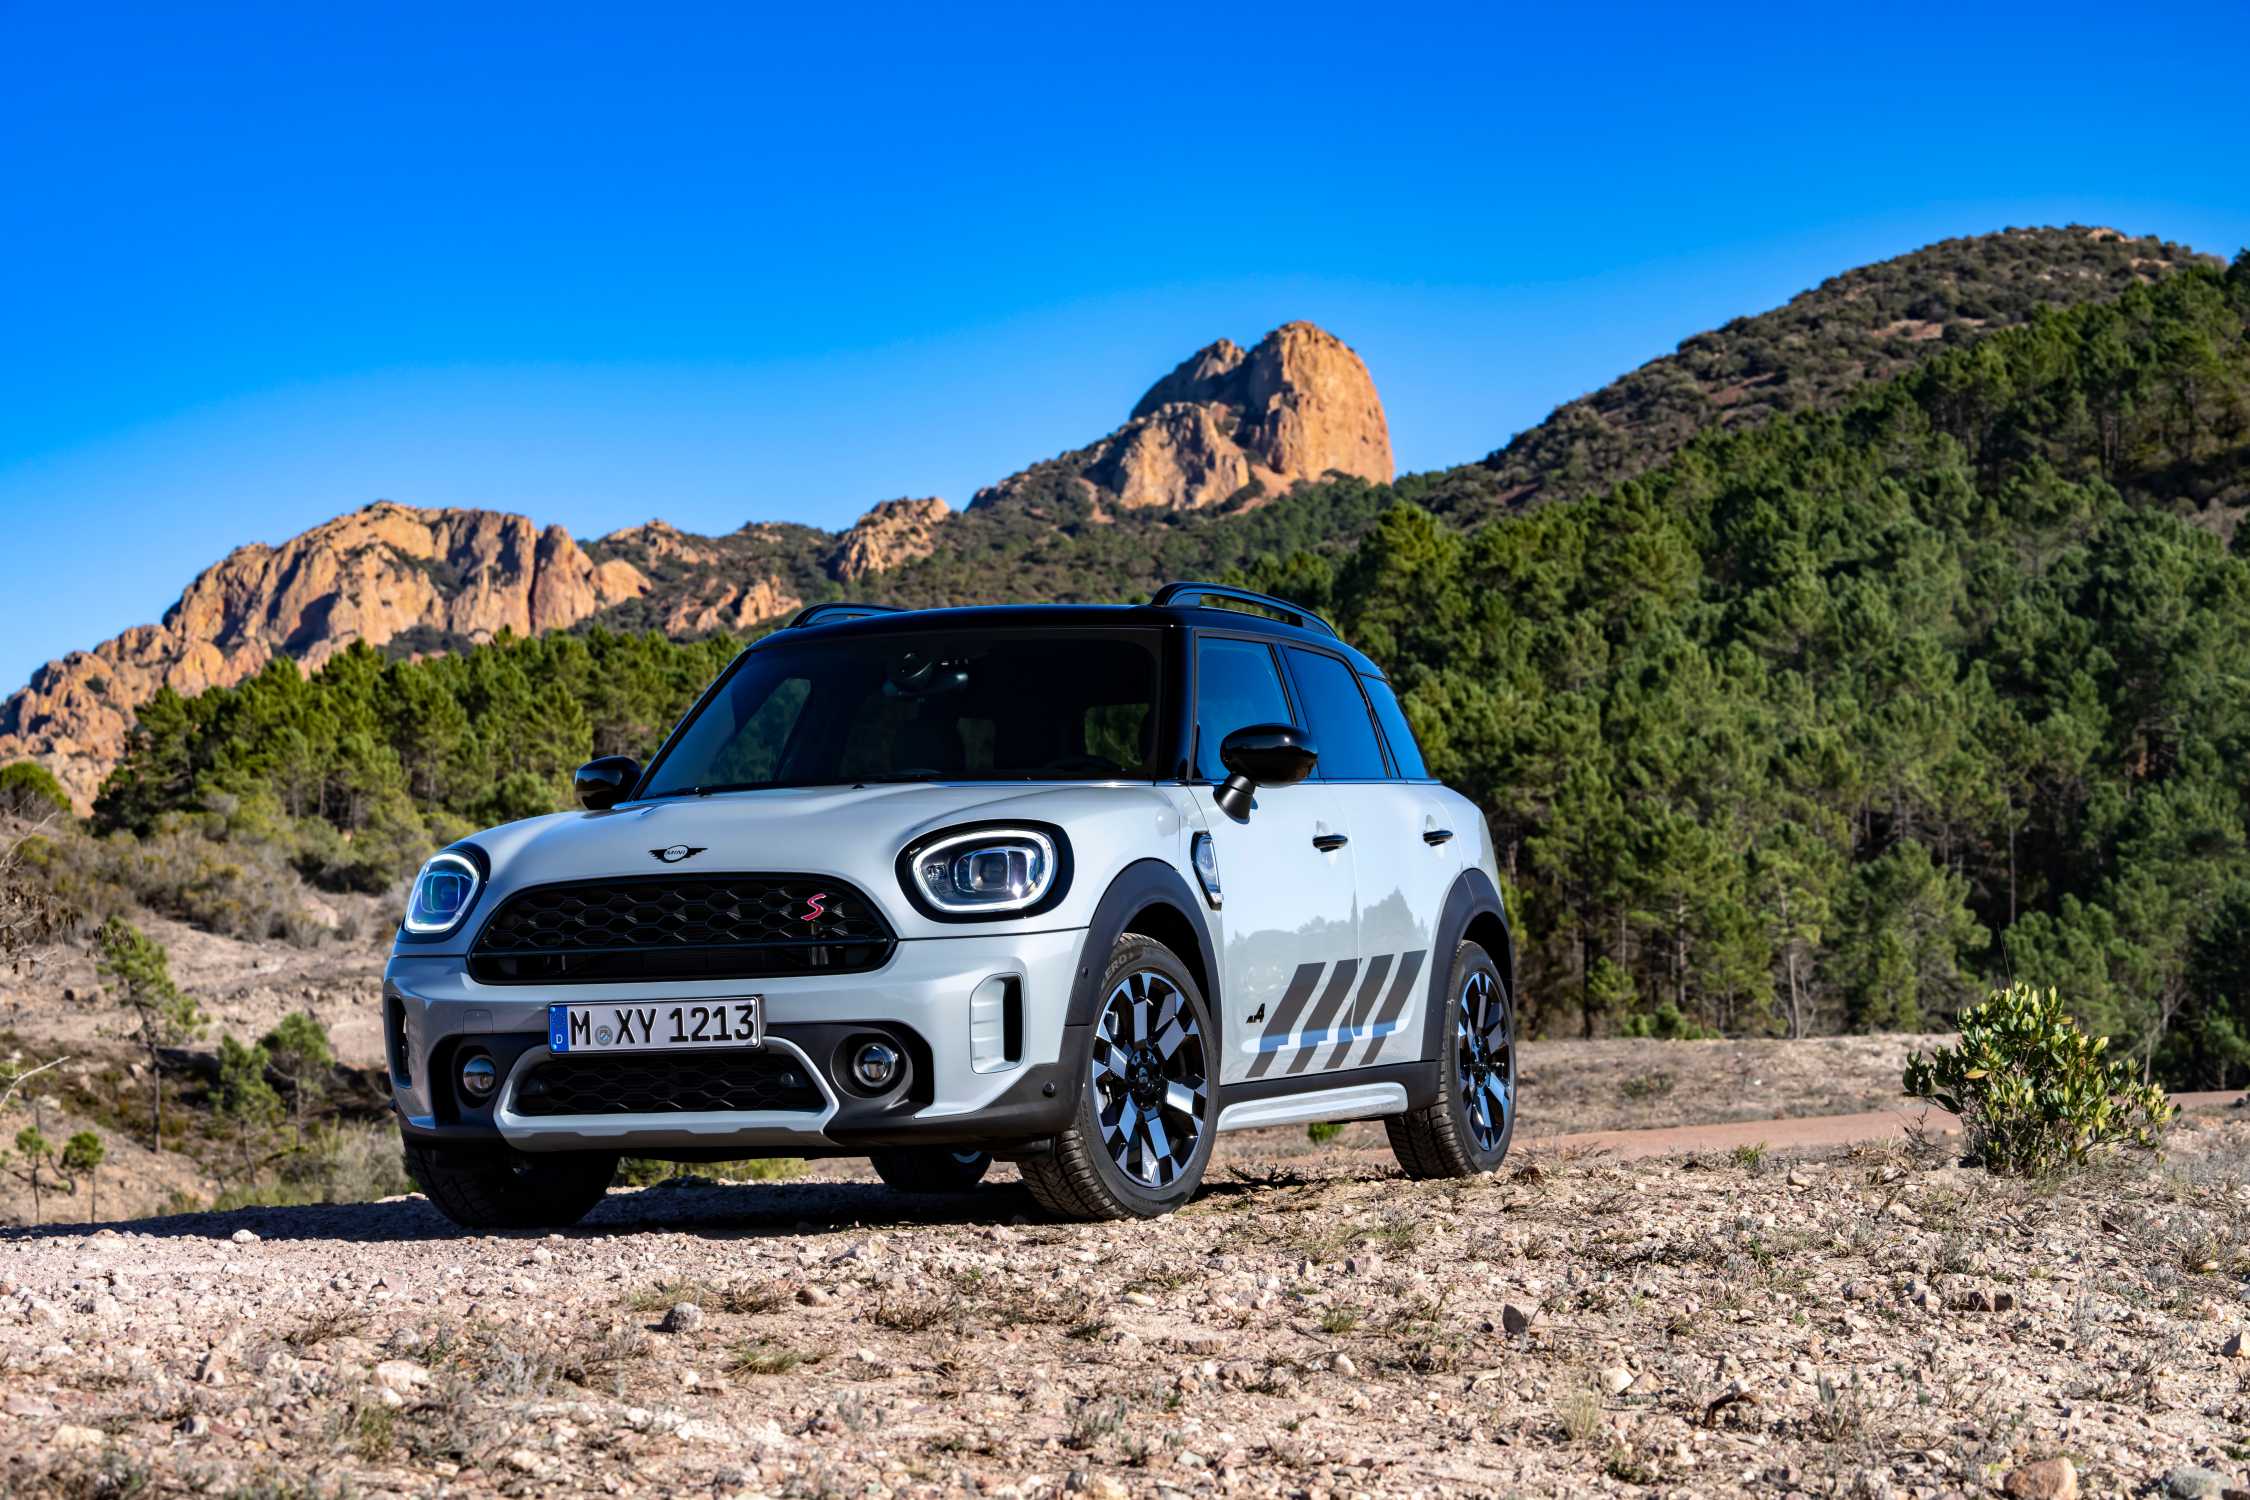 THE MINI COUNTRYMAN UNTAMED EDITION BRINGS A TOUCH OF INDIVDUAL STYLE TO  ANY ADVENTURE.